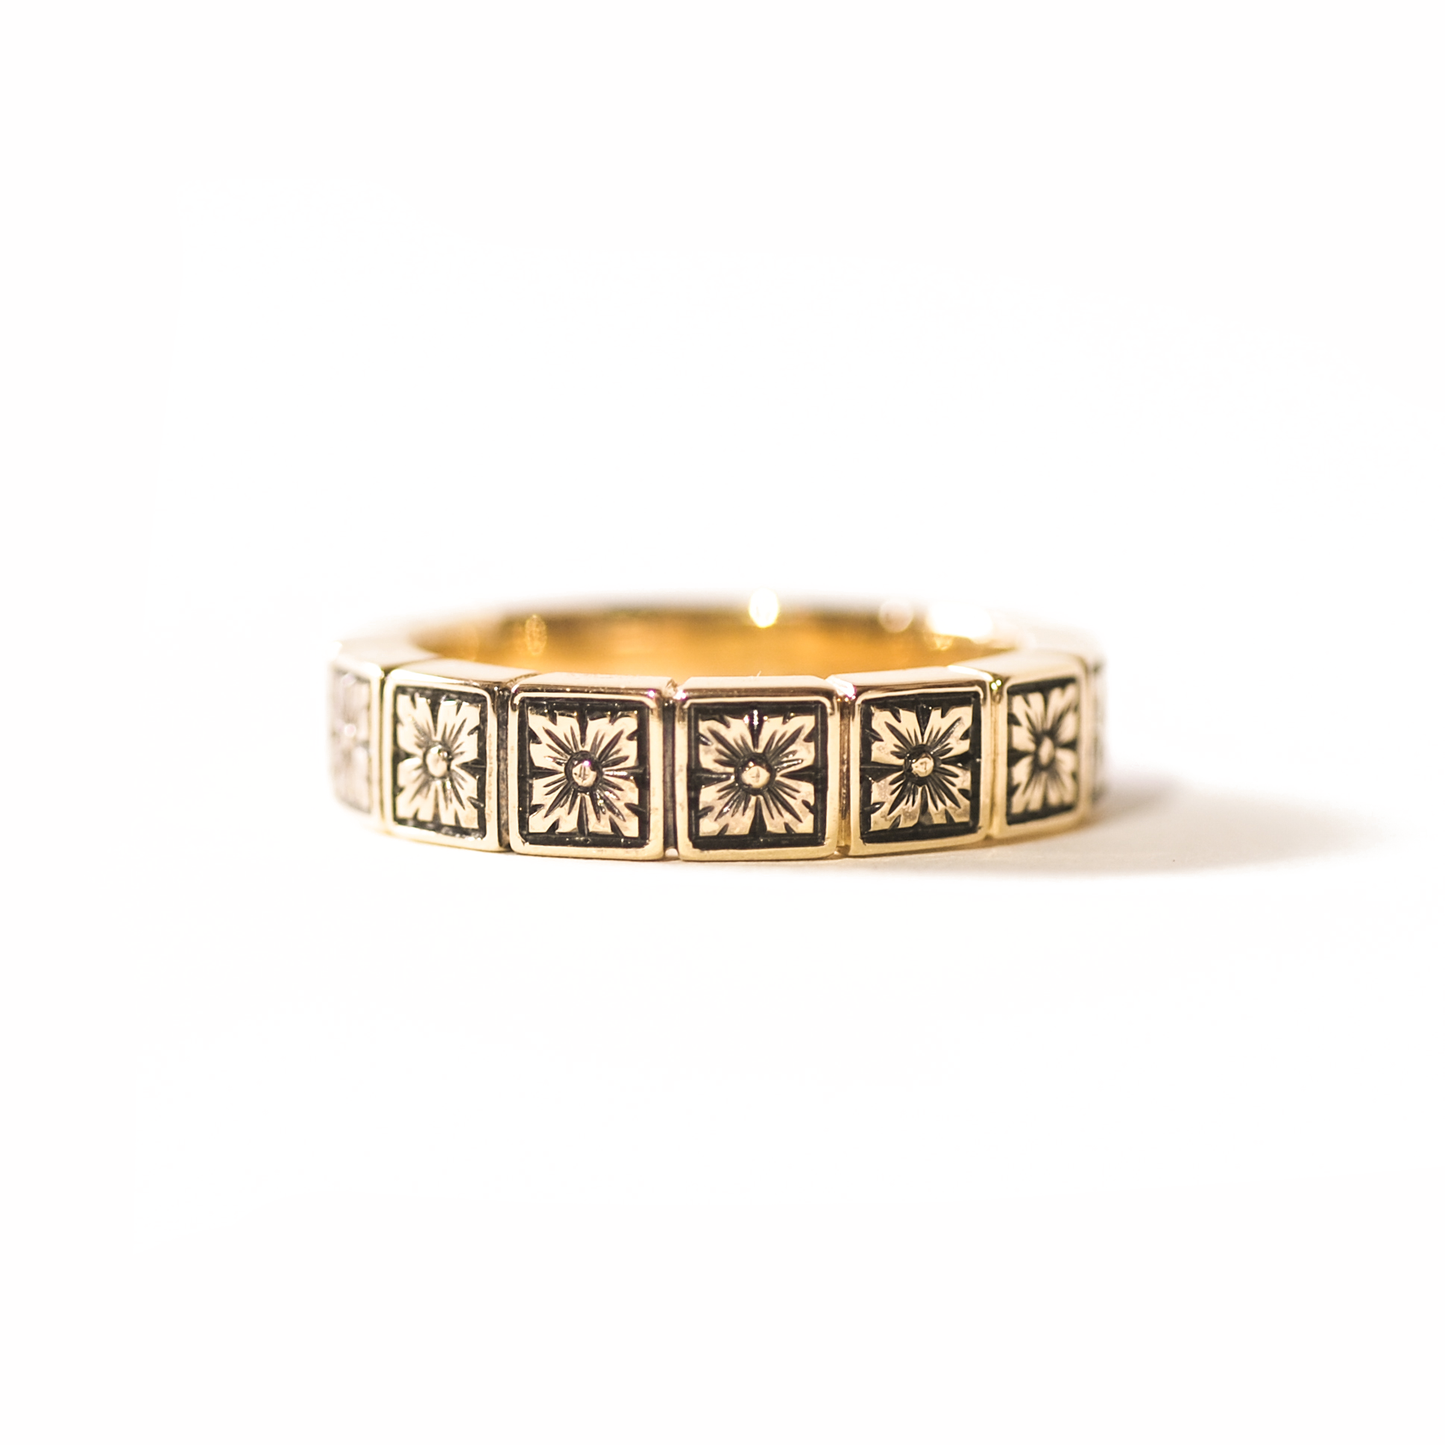 5mm Art Deco Engraved Notched Band Ring